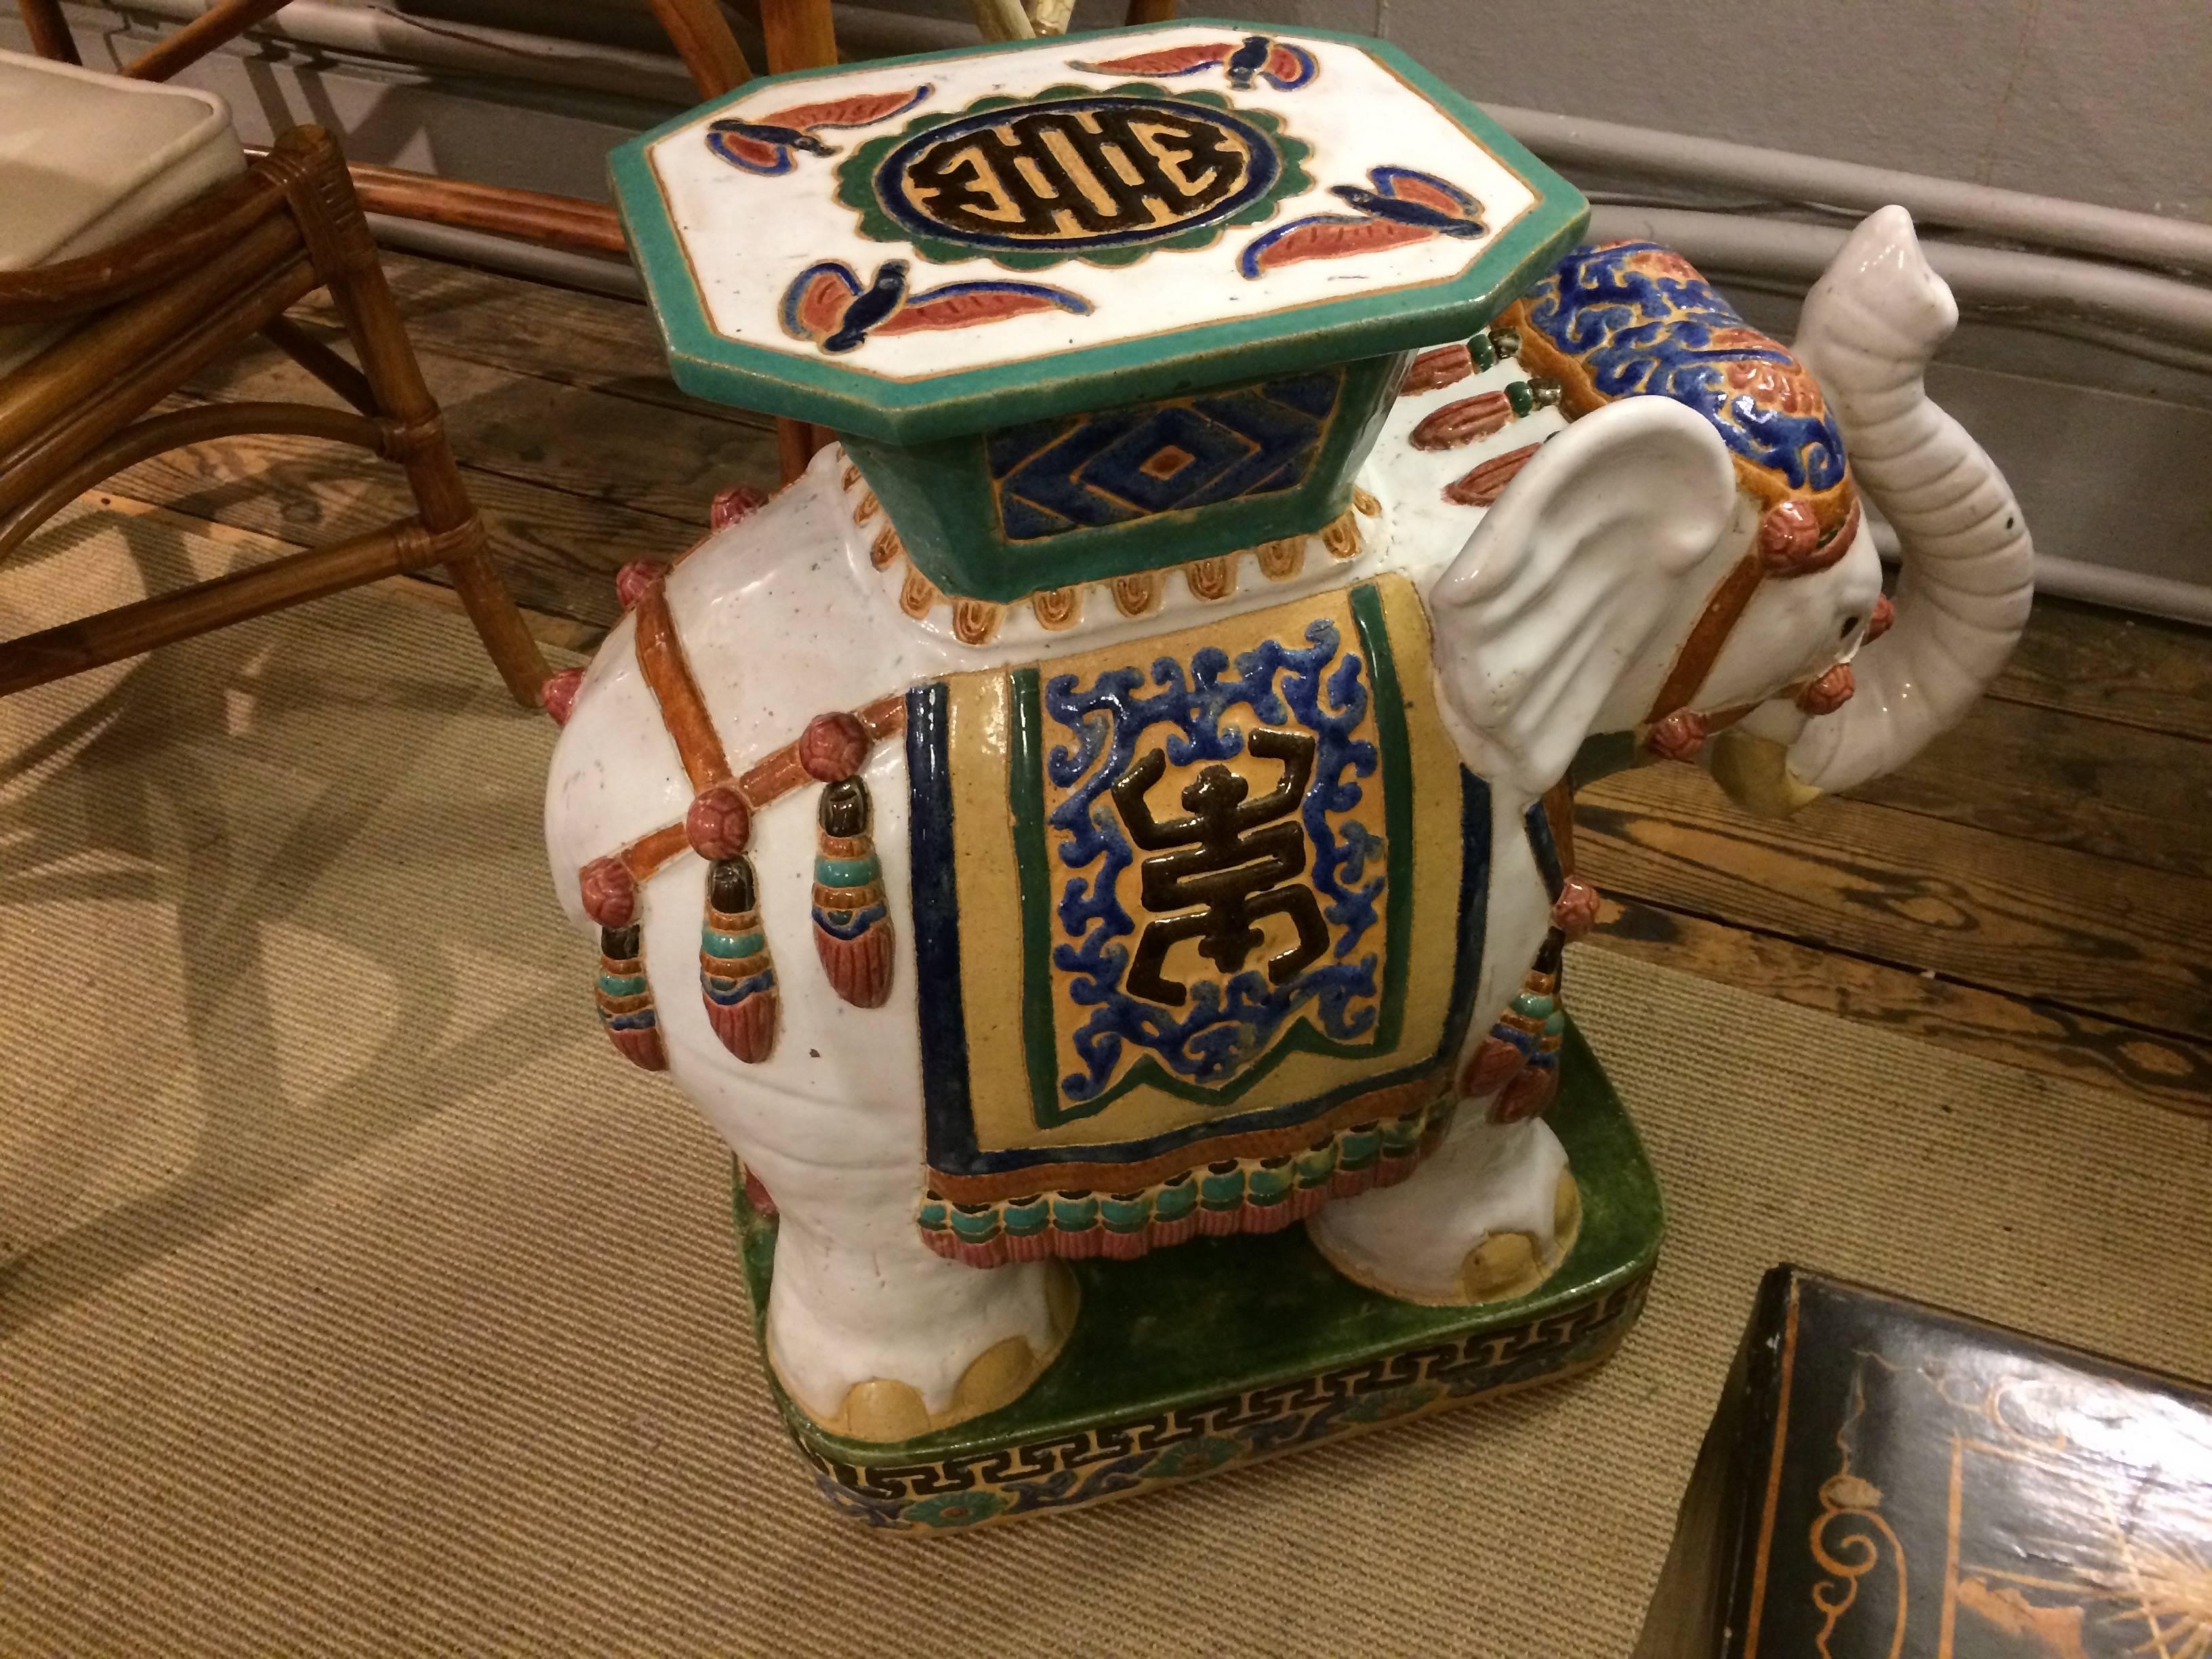 Wonderful hand-painted ceramic garden stool in the shape of an elephant with his trunk in the lucky upright position.